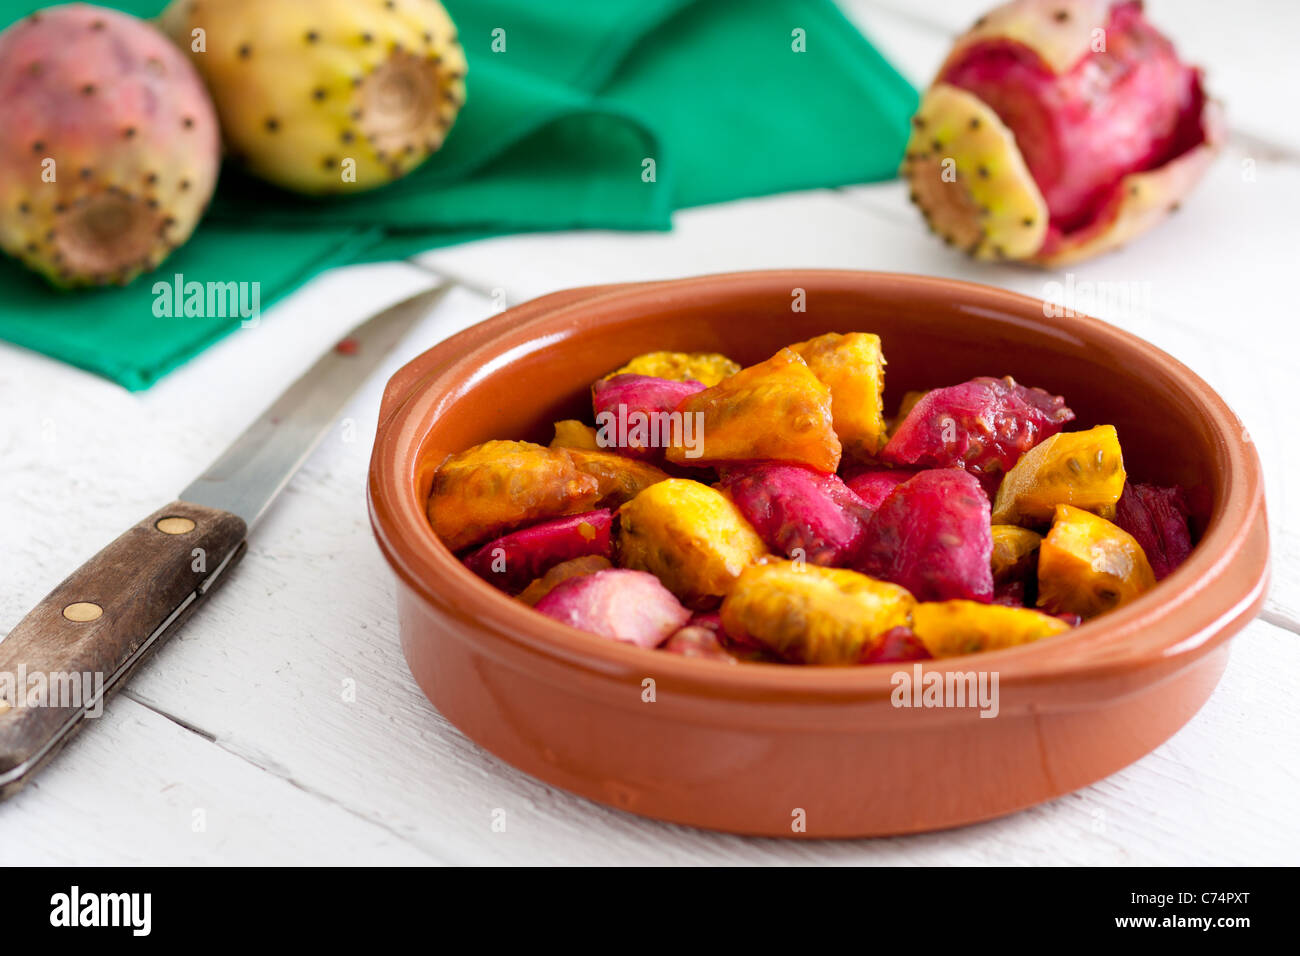 Sliced Indian Figs in a Bowl on White Wood Stock Photo